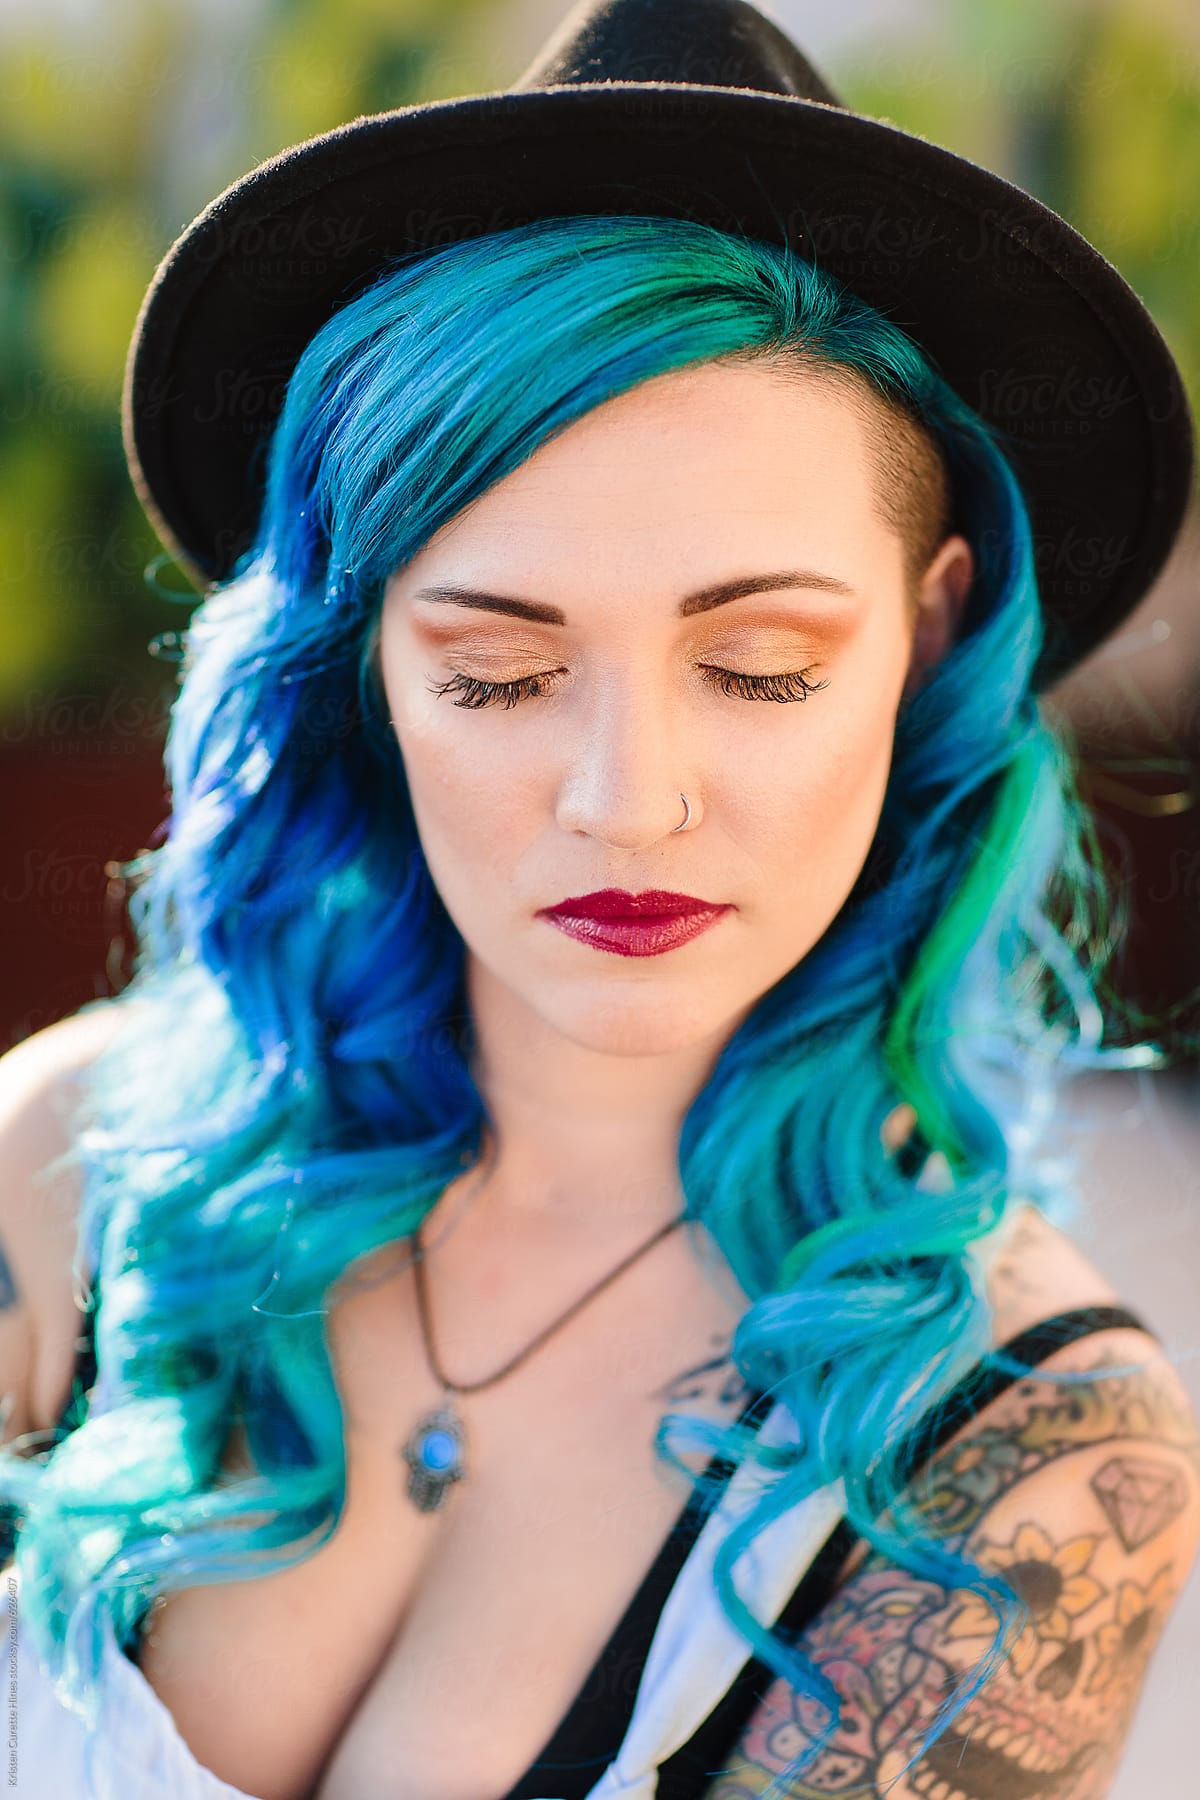 Vertical portrait of a beautiful mixed ethnicity women with blue dyed hair and a nose ring.